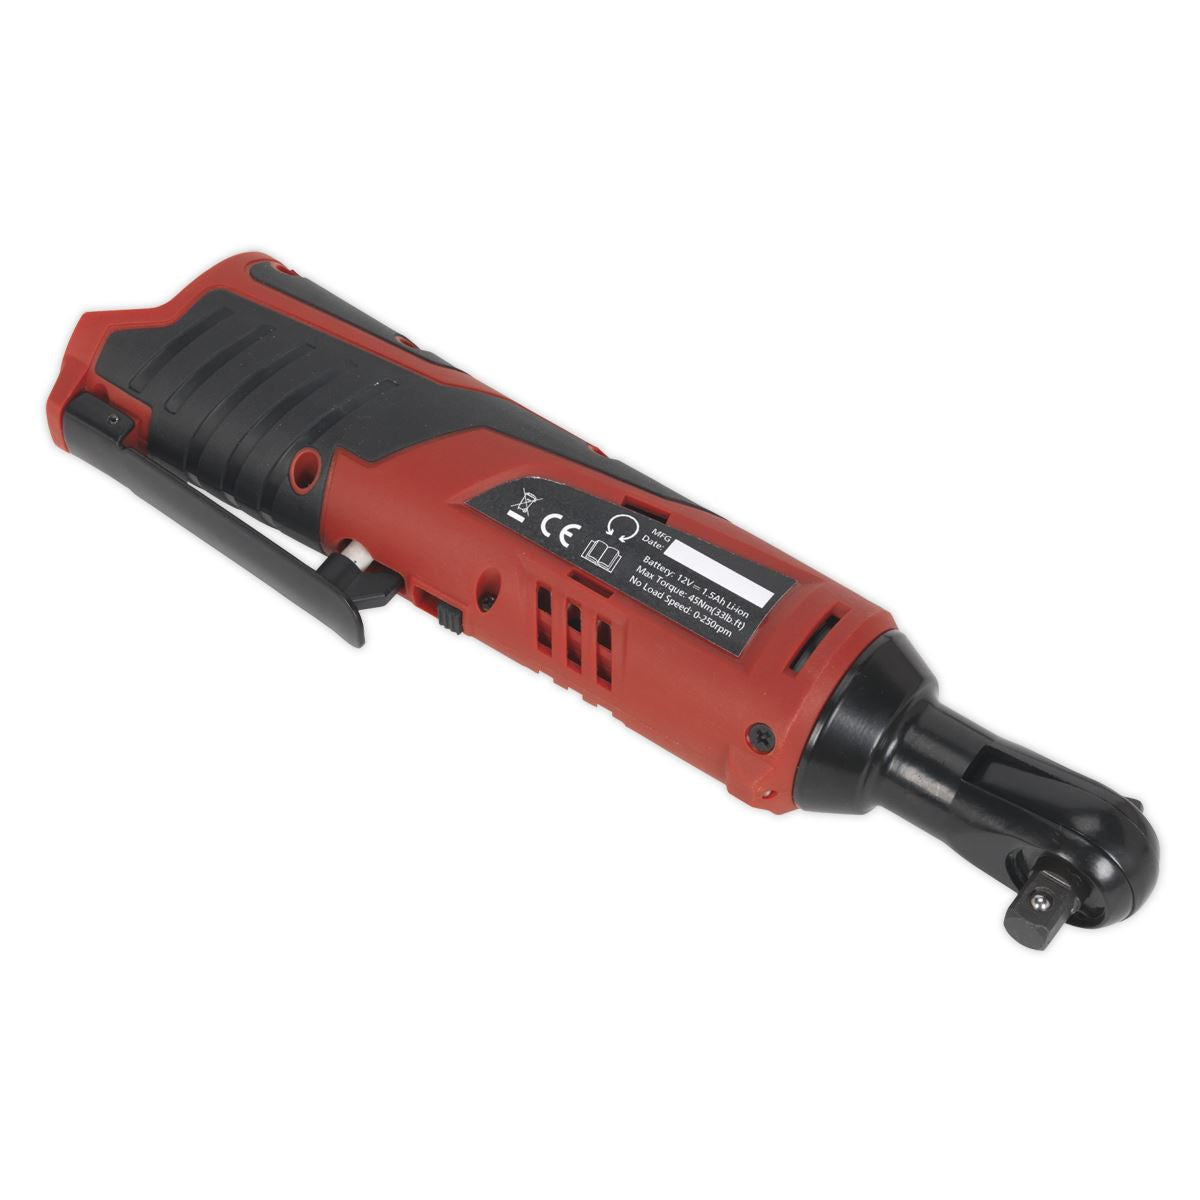 Sealey Cordless Ratchet Wrench 3/8"Sq Drive 12V SV12 Series - Body Only